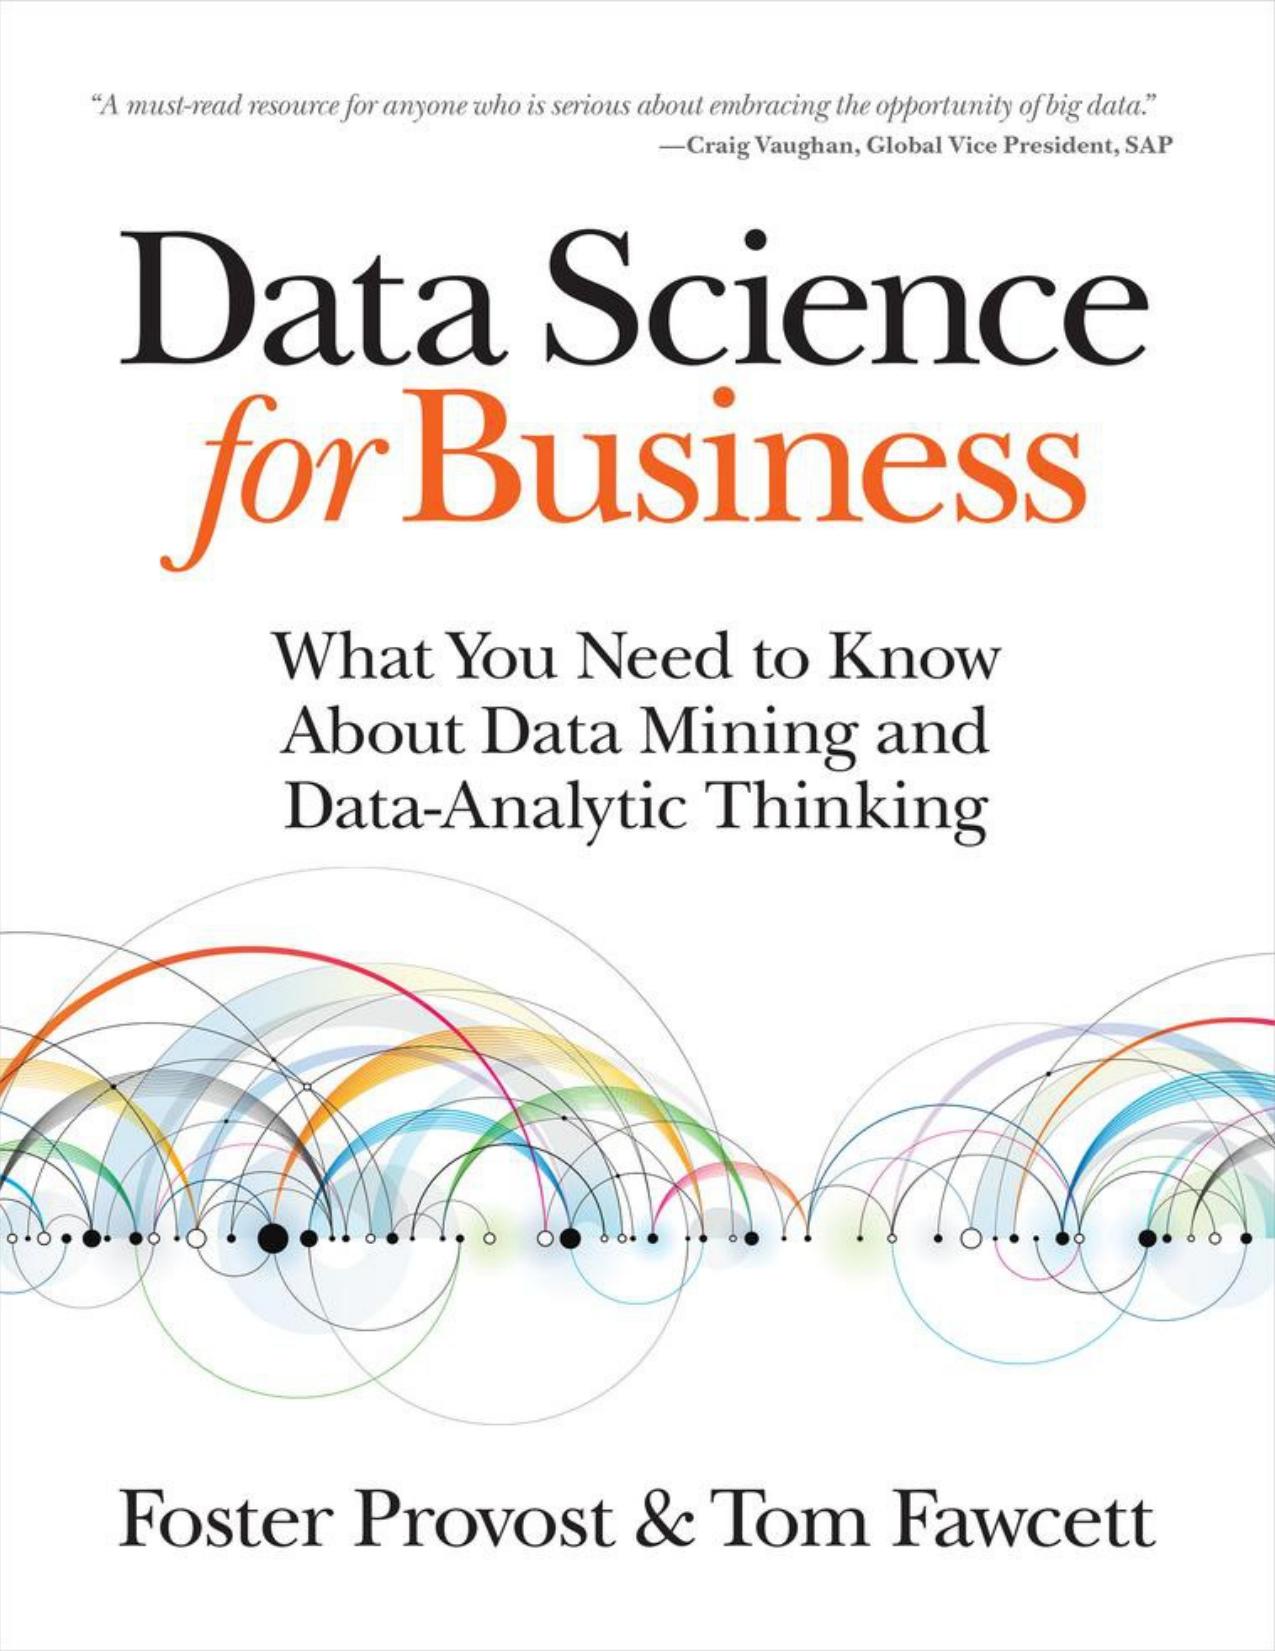 Data Science for Business by Foster Provost & Tom Fawcett